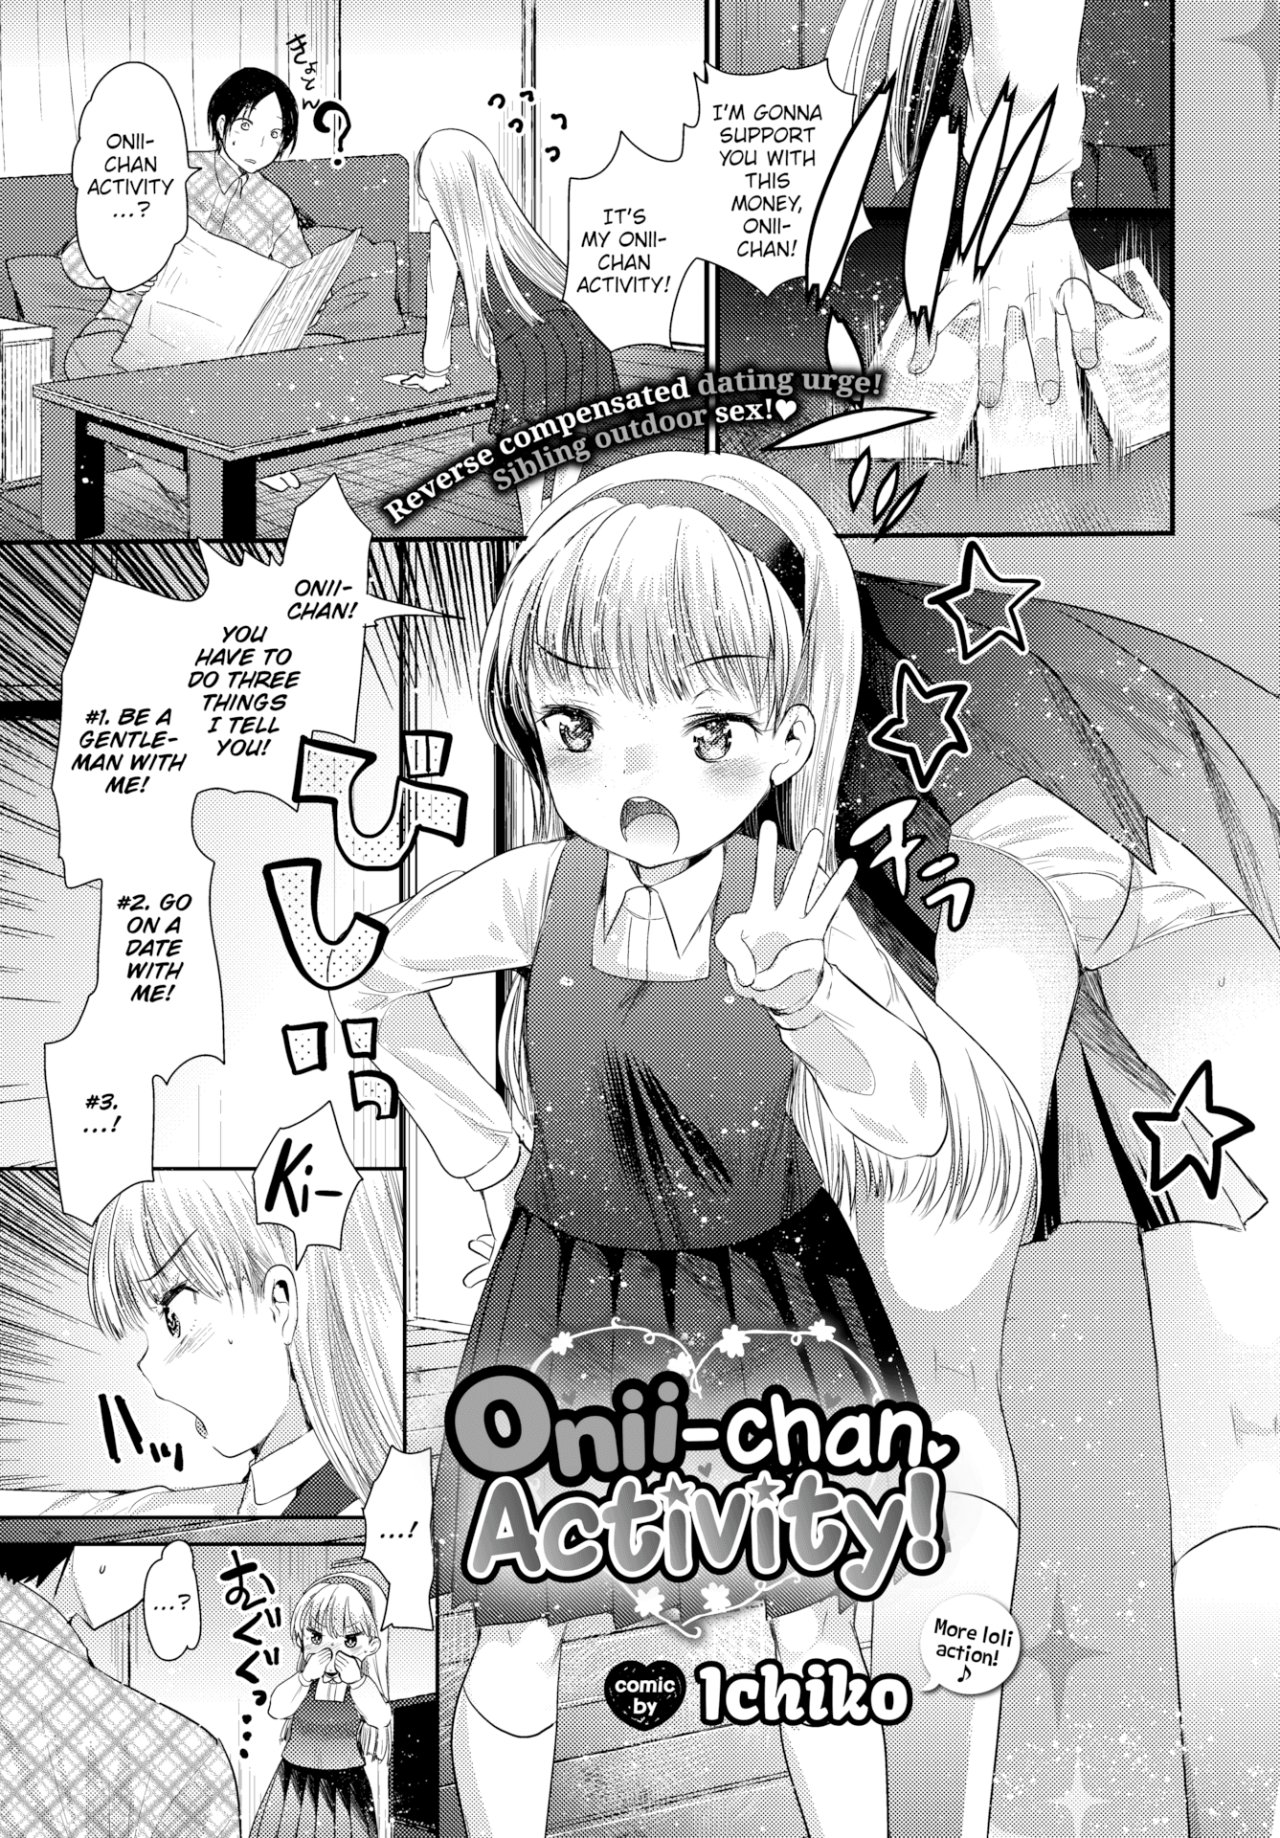 Onii-chan Activity! - 0